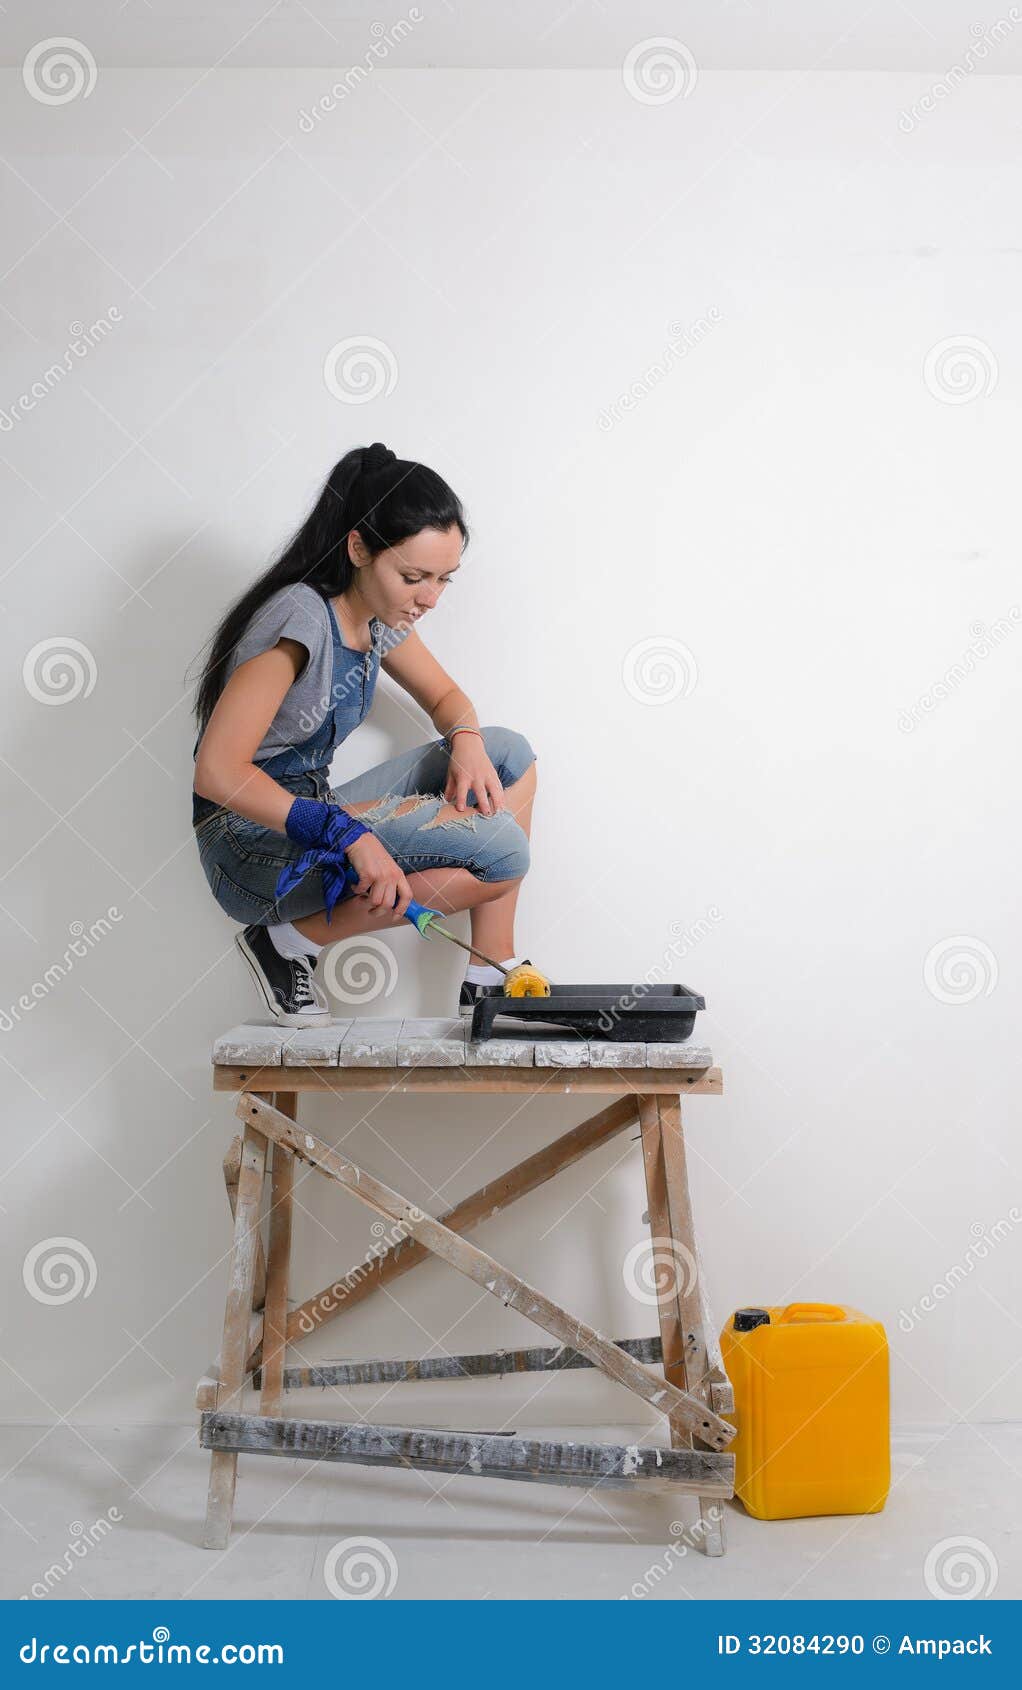 capable woman painting the wall of her house